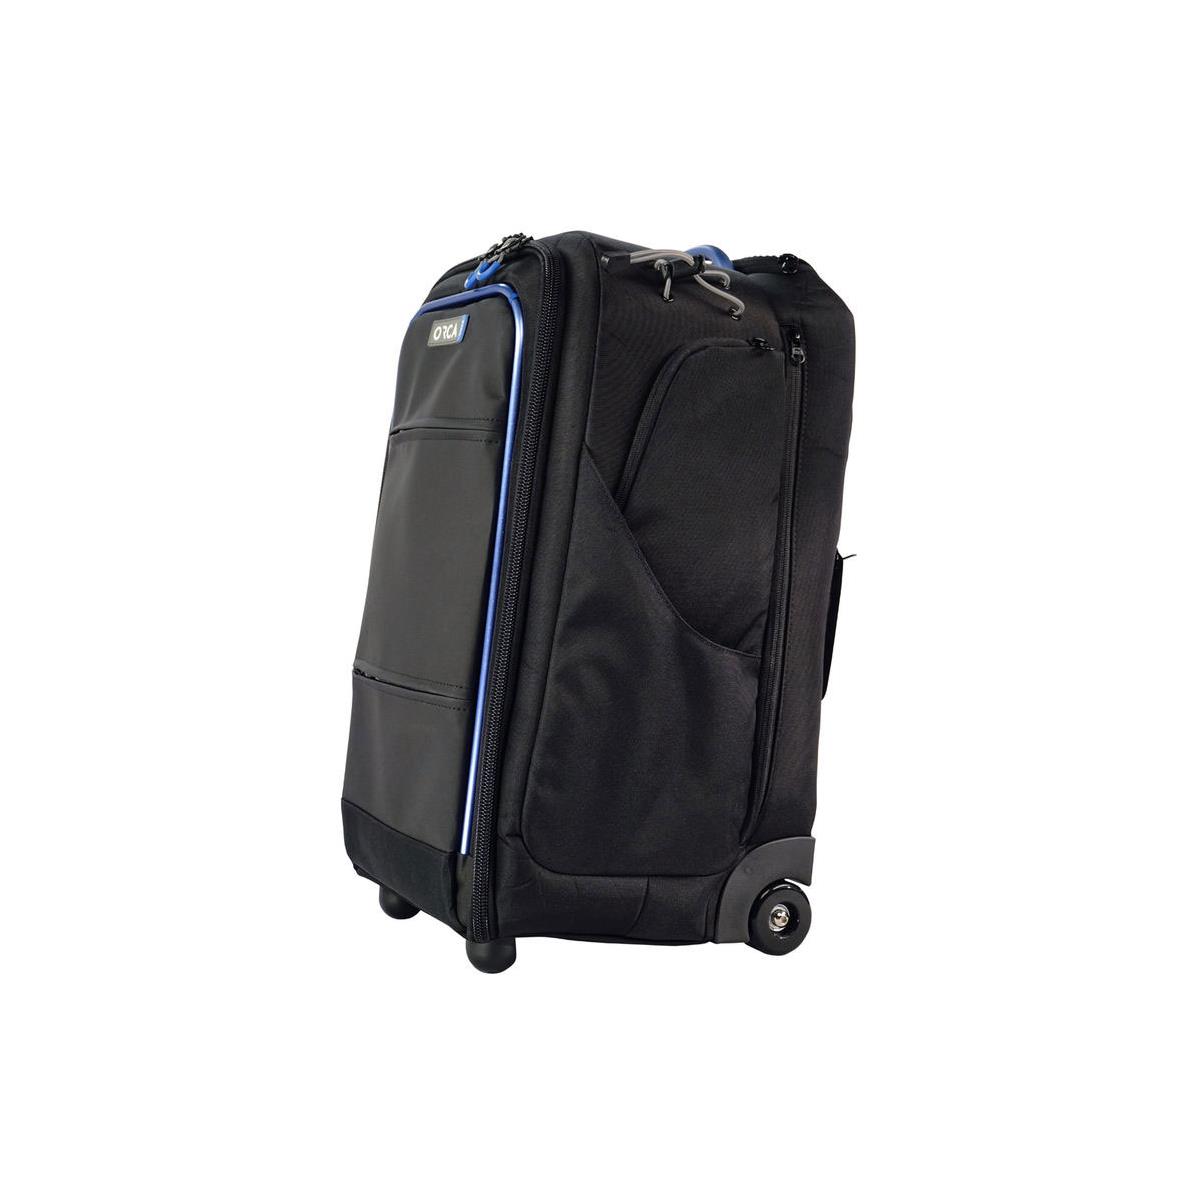 Image of Orca OR-26 Trolley Backpack for Video Camera or Other Heavy Gear